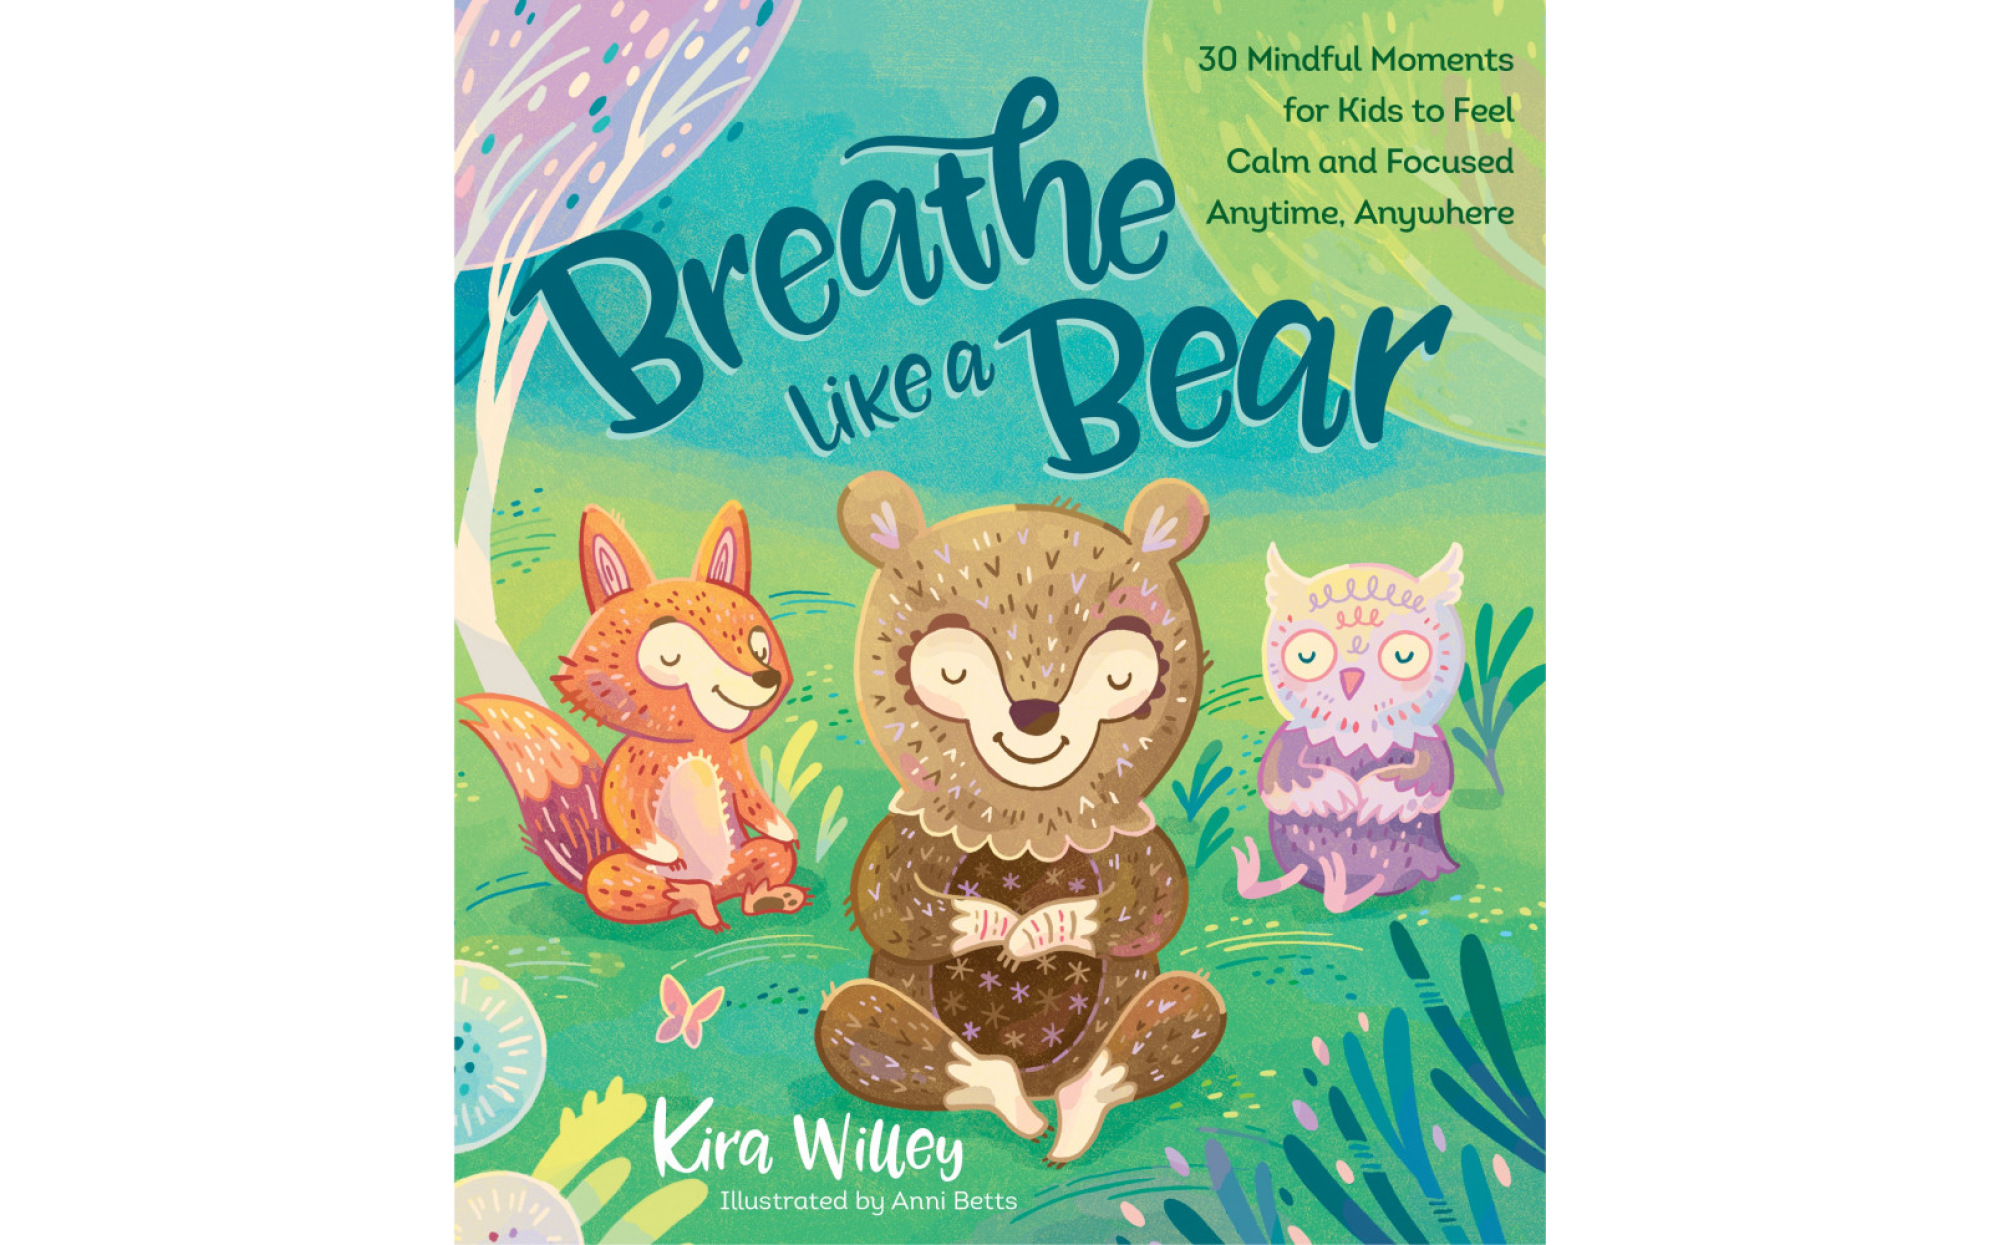 Feel　Bear:　Breathe　Moments　to　a　Kids　Focused　Calm　30　Like　Books　Anywhere　–　Mindful　and　for　Anytime,